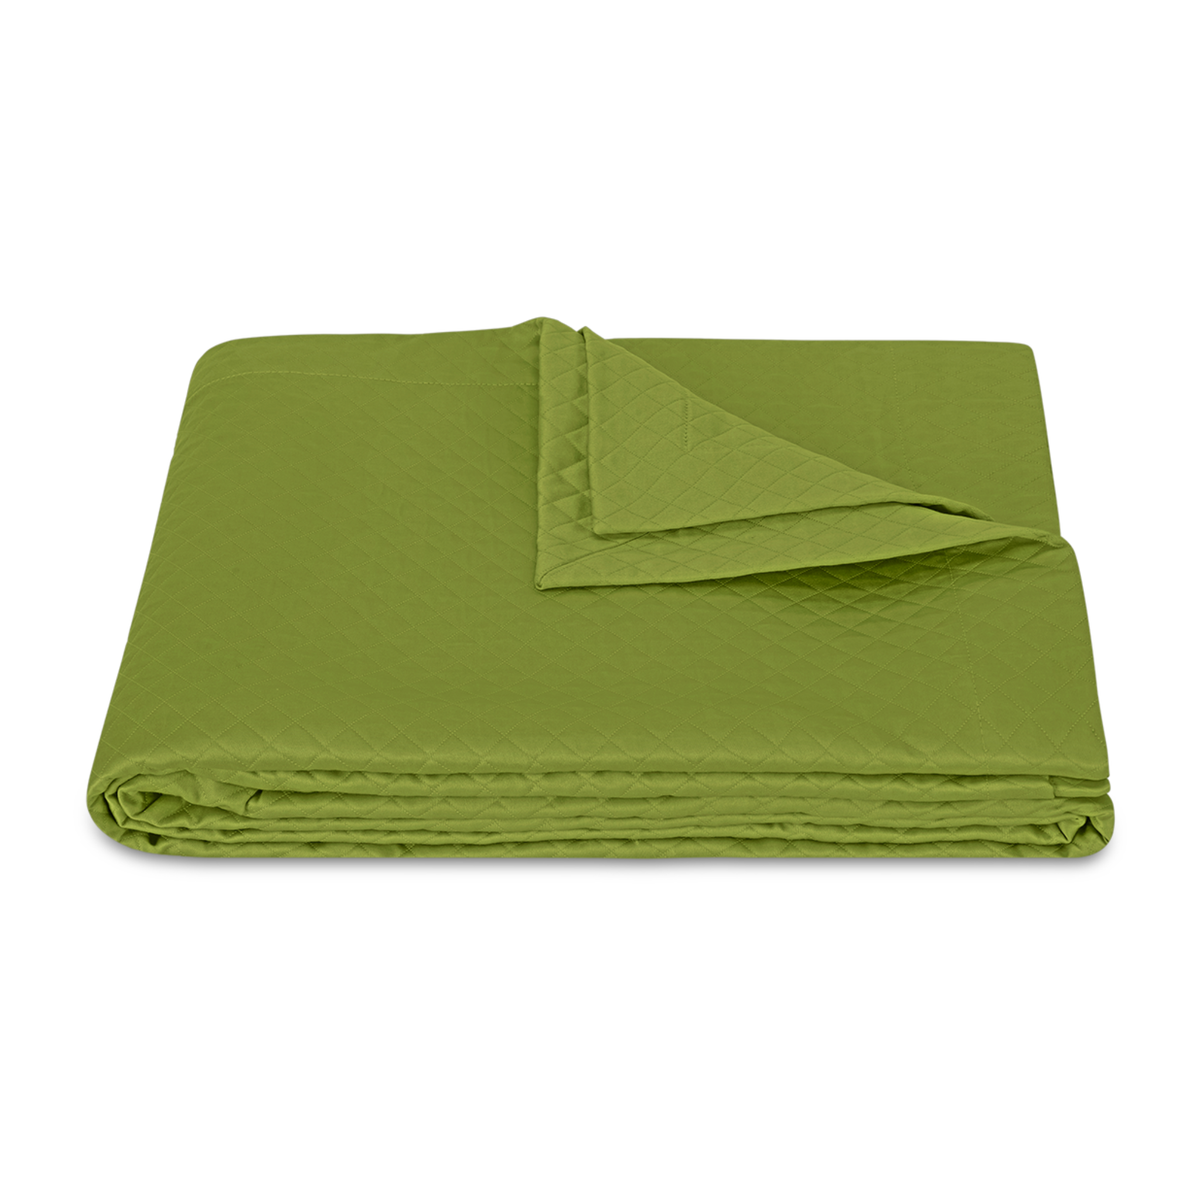 Folded Coverlet of Matouk Petra Bedding in Grass Color